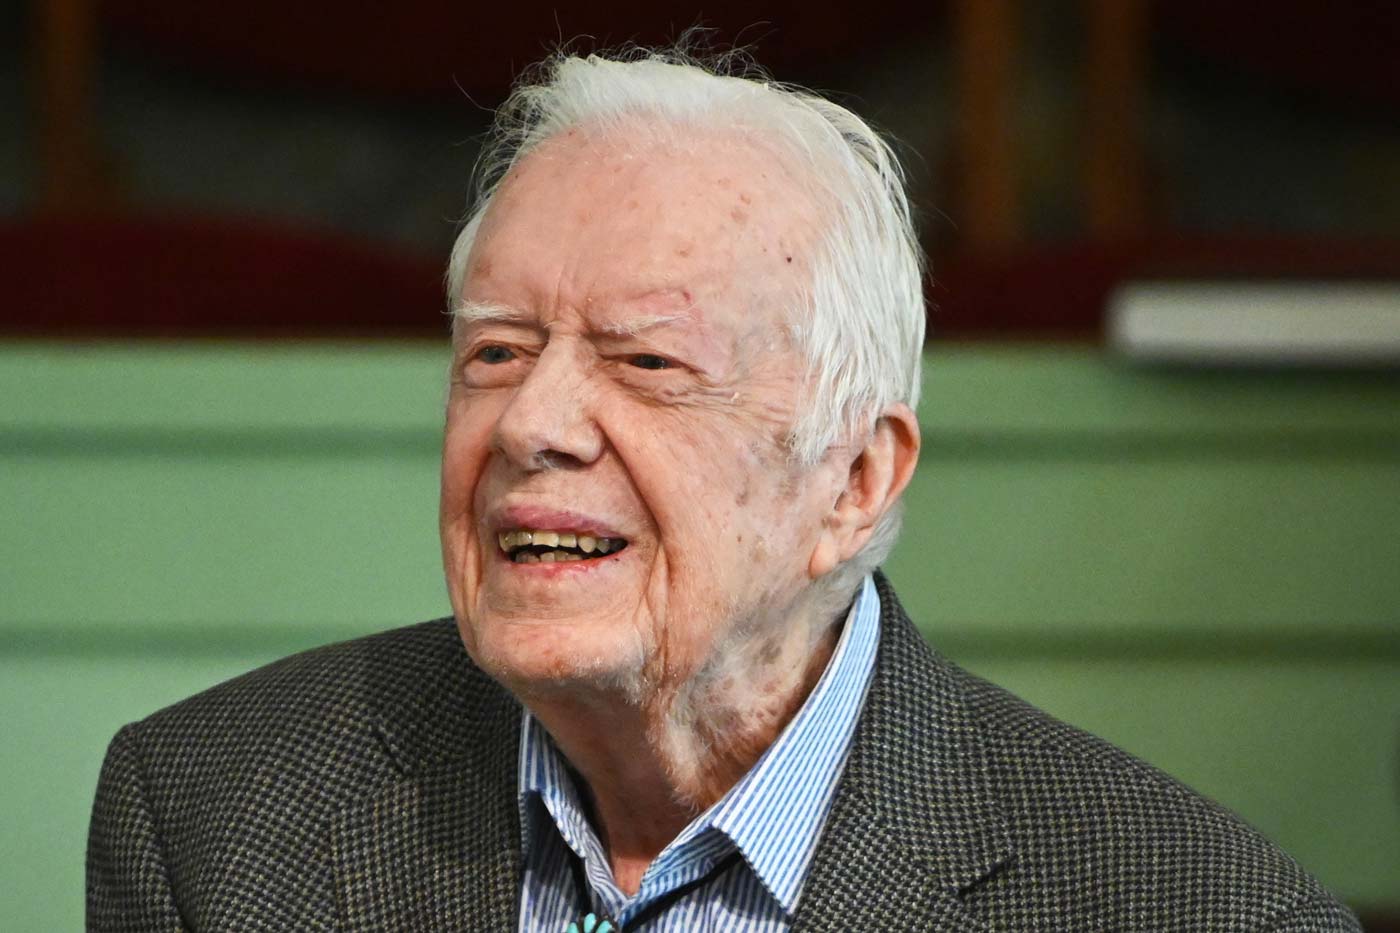 Excerpt: Jimmy Carter’s struggle to separate church and state